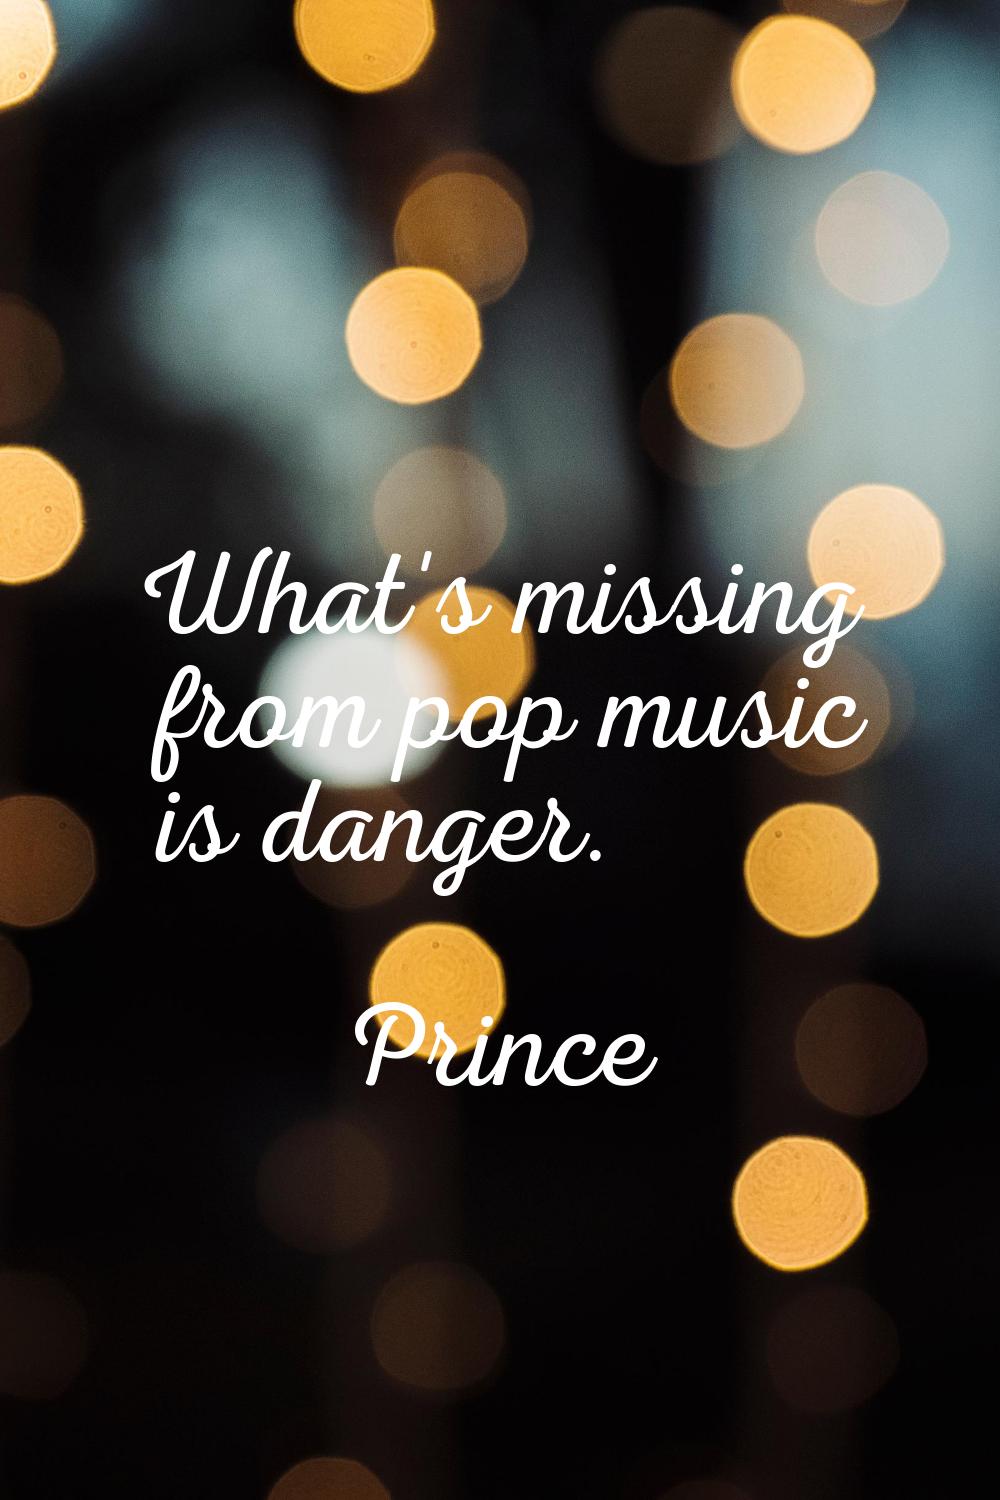 What's missing from pop music is danger.